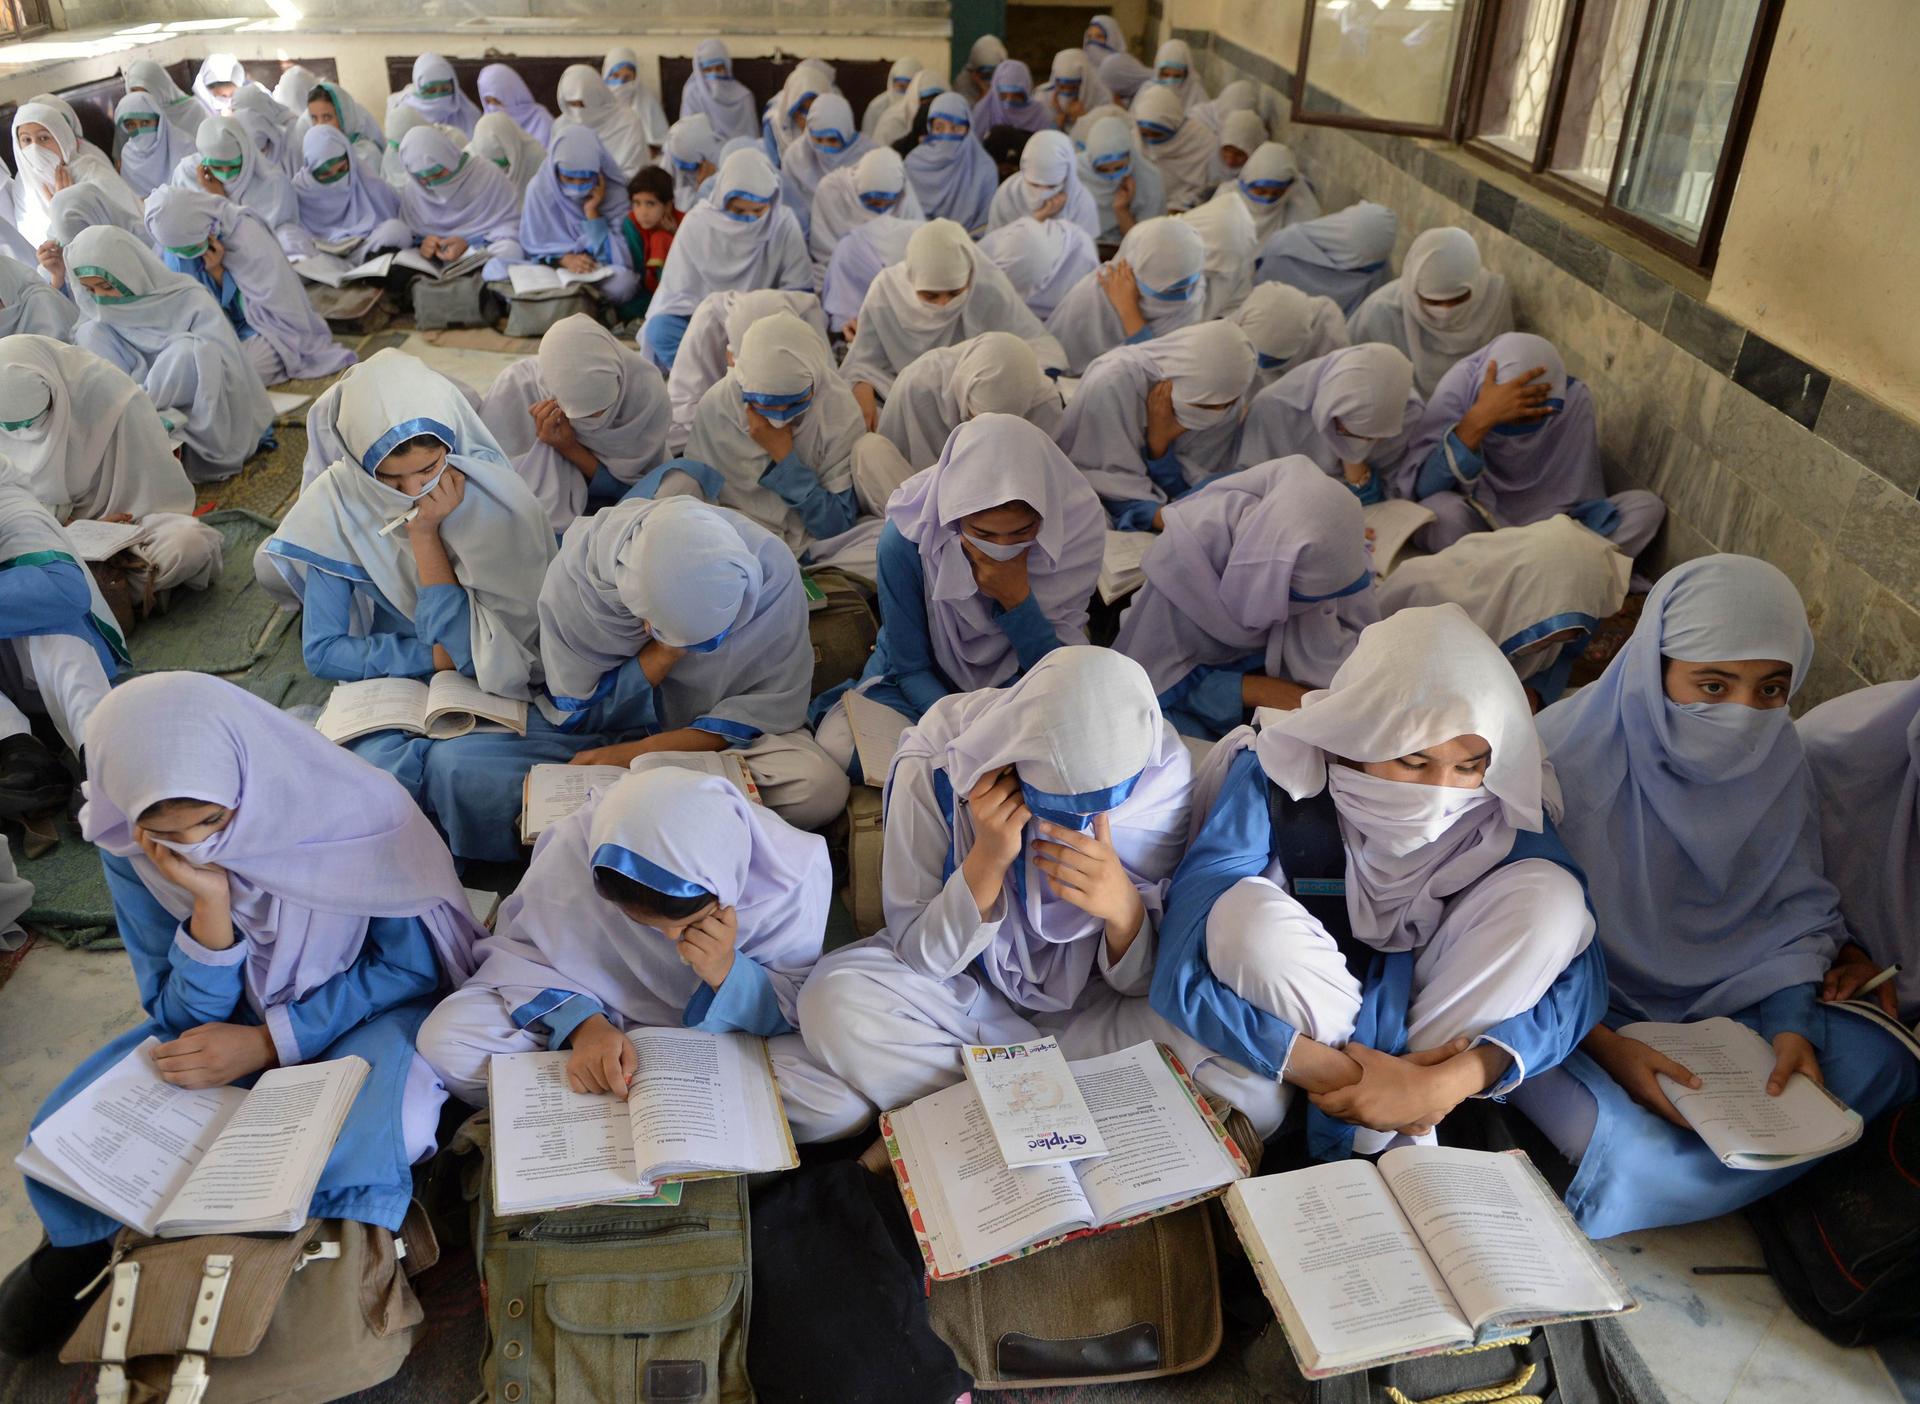 Girls at school in Mingora, capital of Swat Valley. Malala Yousafzai was shot for championing education for girls. Photo: AFP